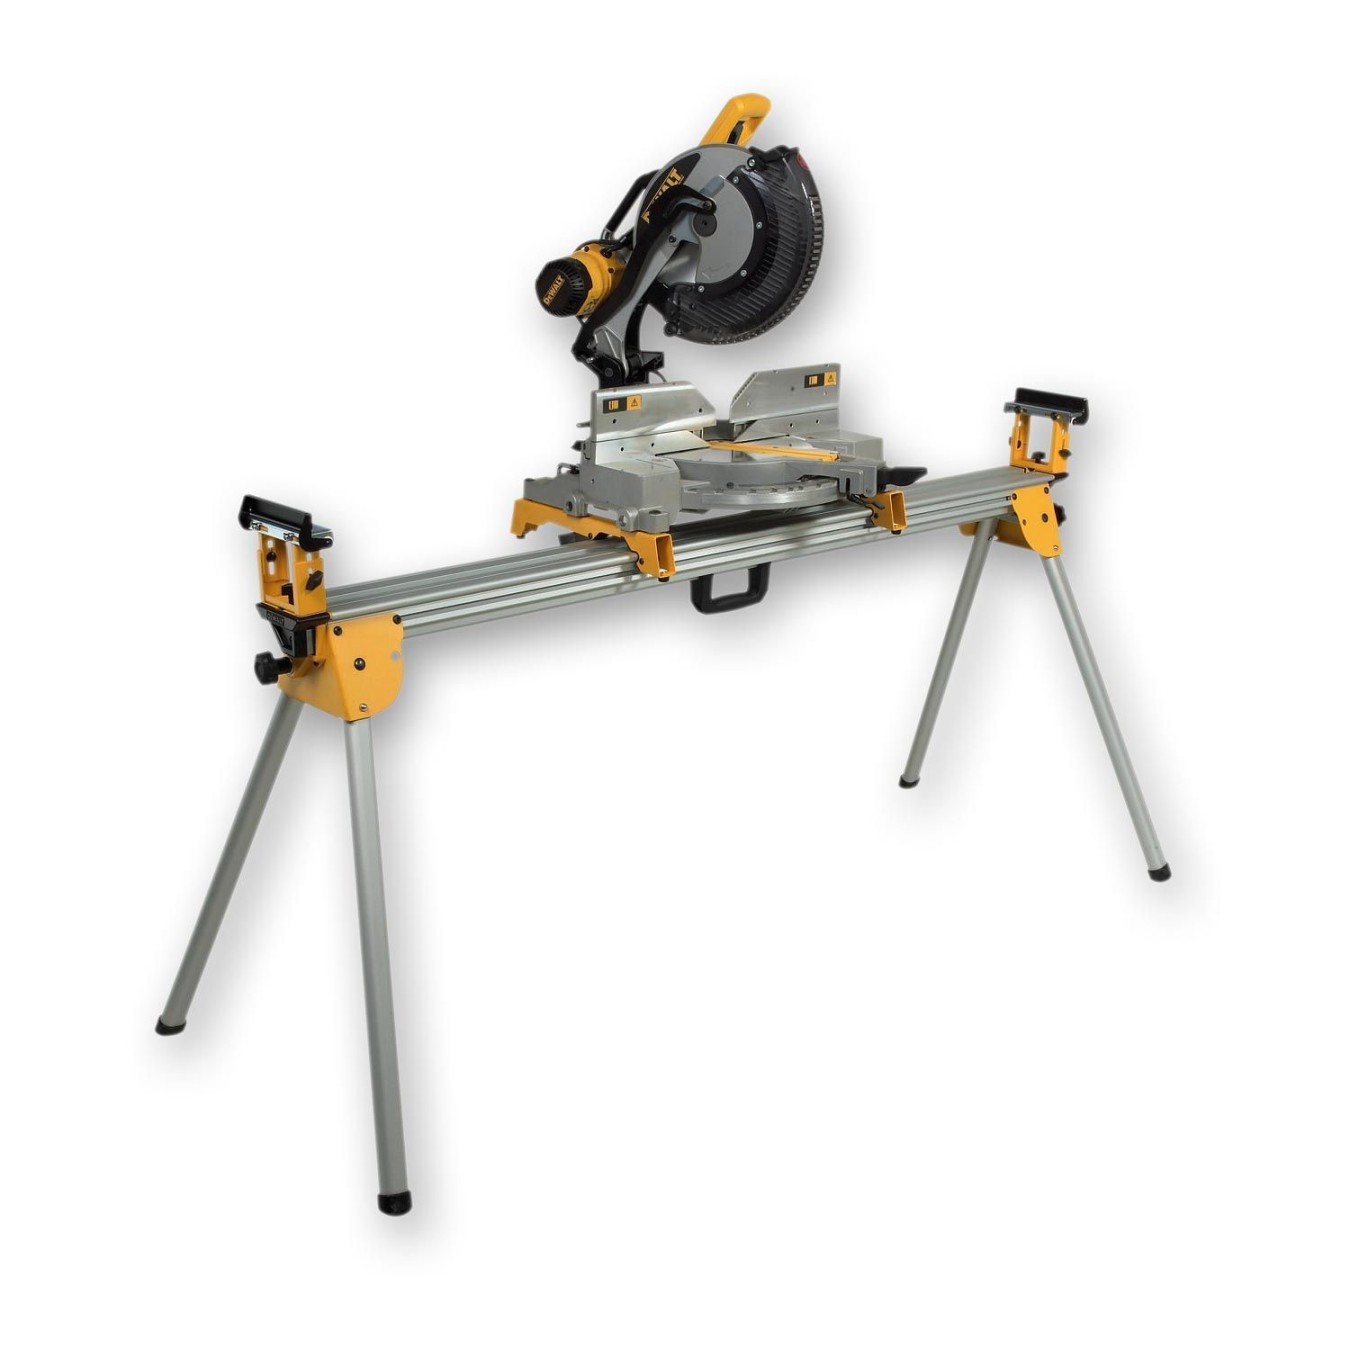 dewalt-dws-mm-mitre-saw-amp-stand-package-deal-axminster-tools DeWalt Miter Saw And Stand Review: Cutting Power & Convenience You Need? picture